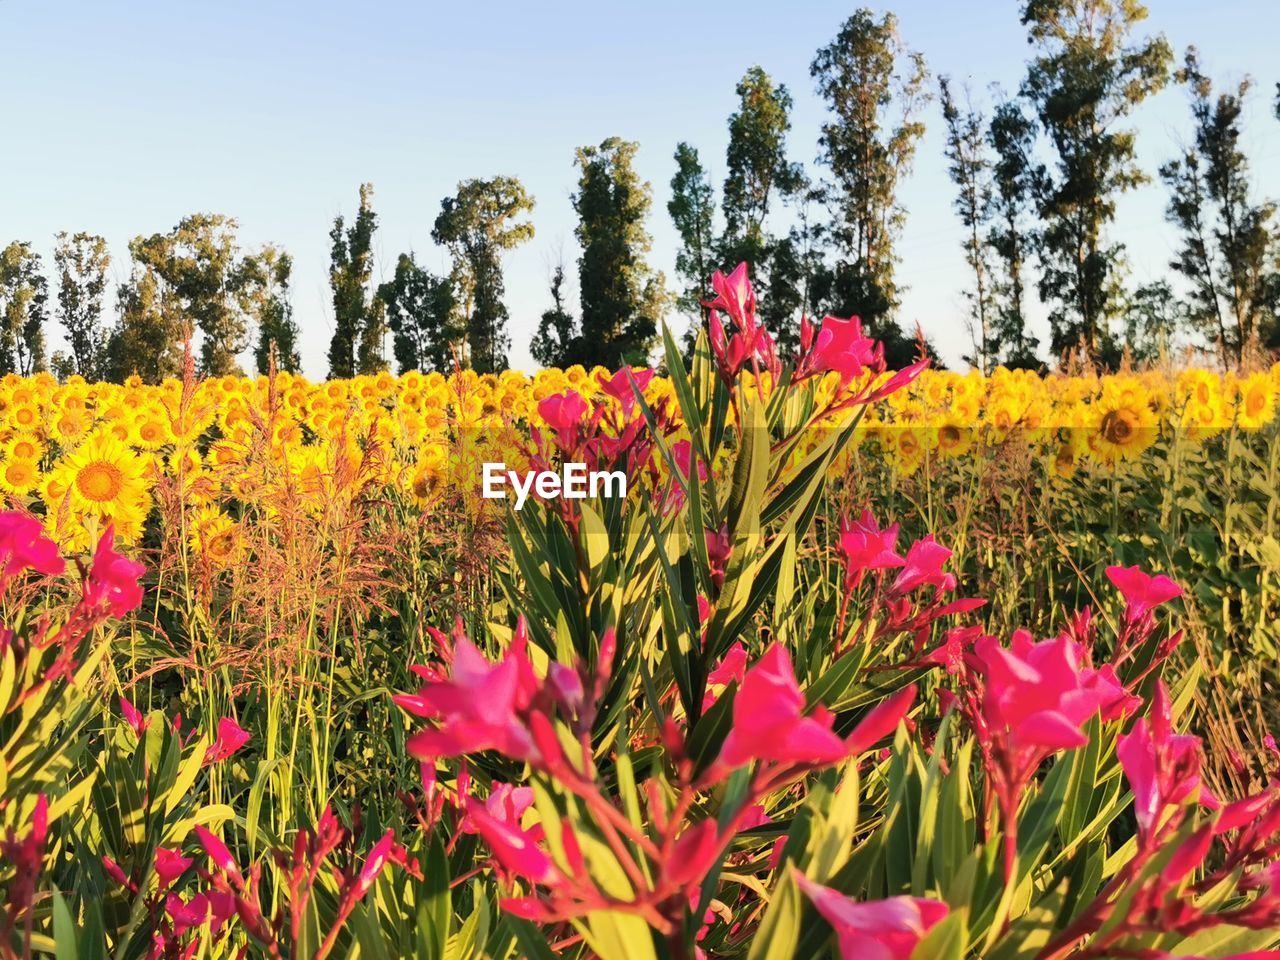 CLOSE-UP OF FLOWERING PLANTS ON FIELD AGAINST SKY